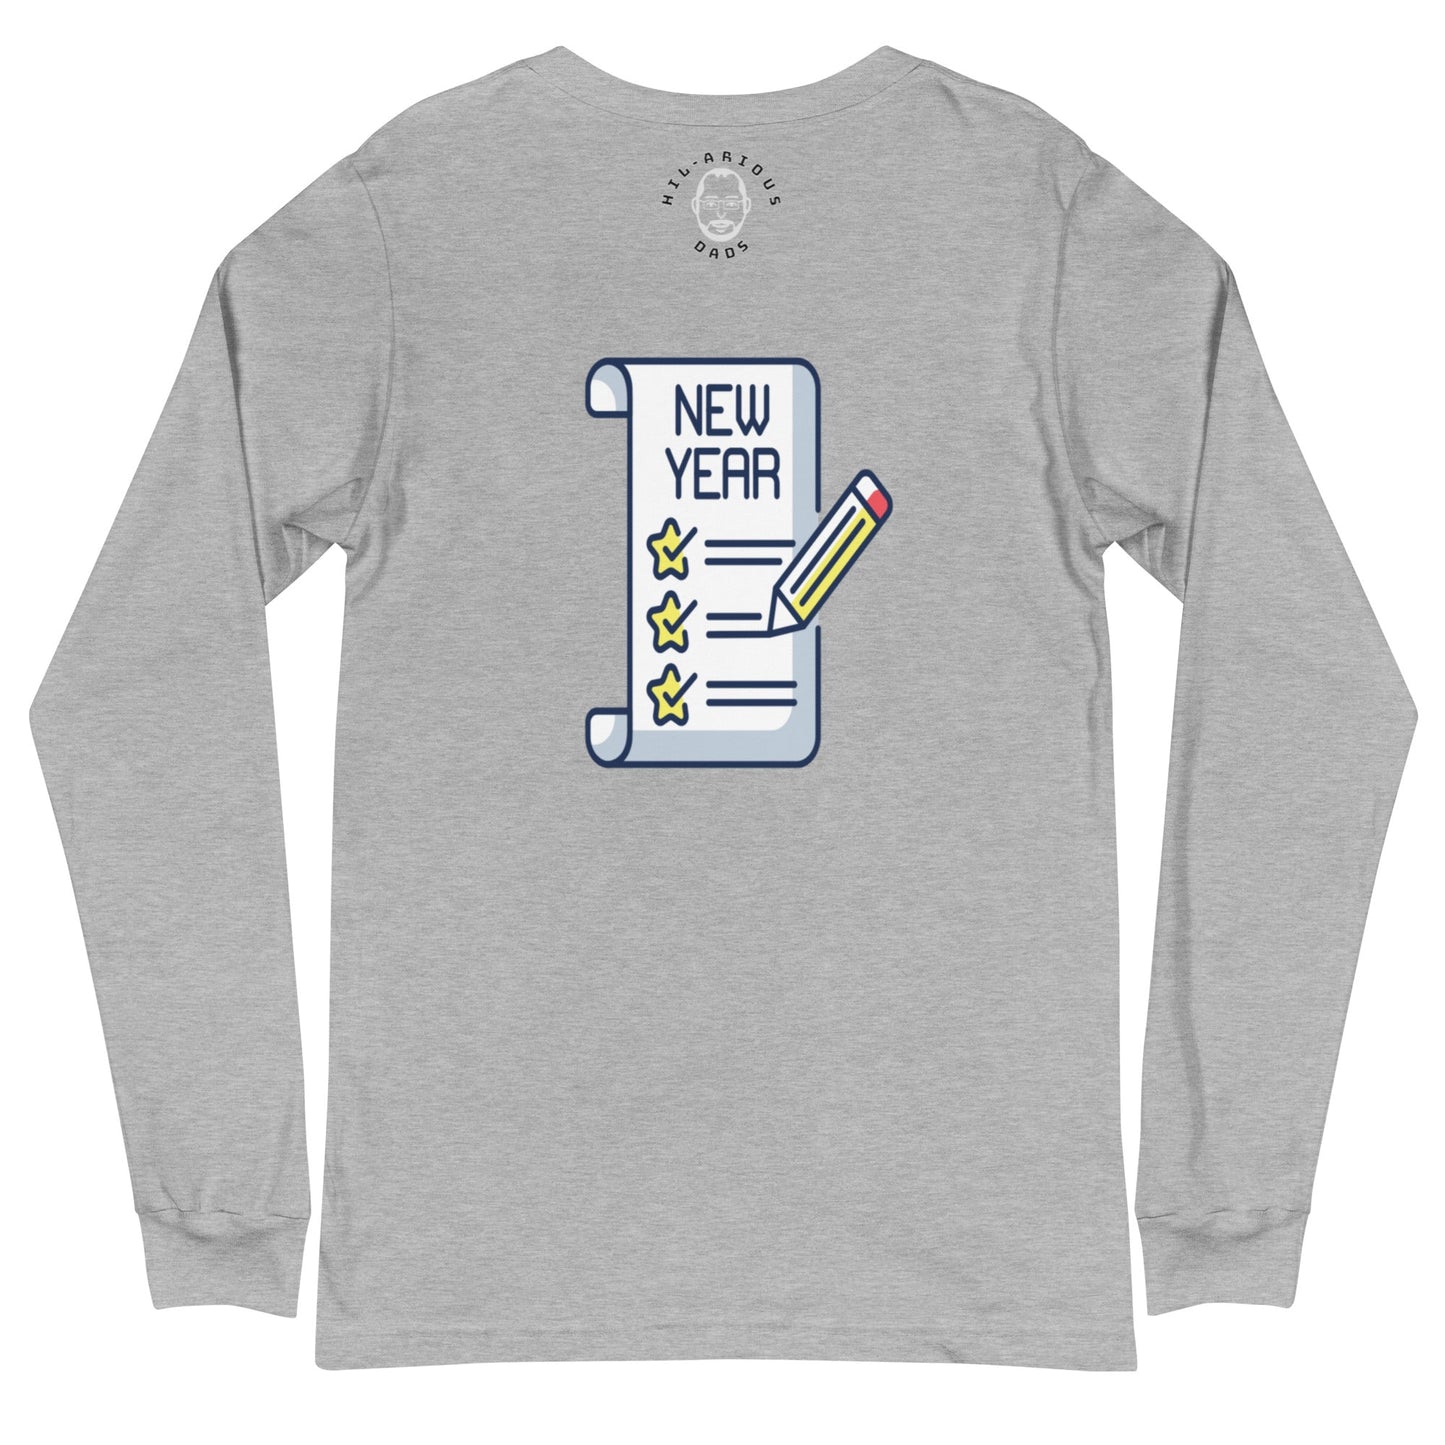 New Year Resolutions-Long Sleeve Tee - Hil-arious Dads